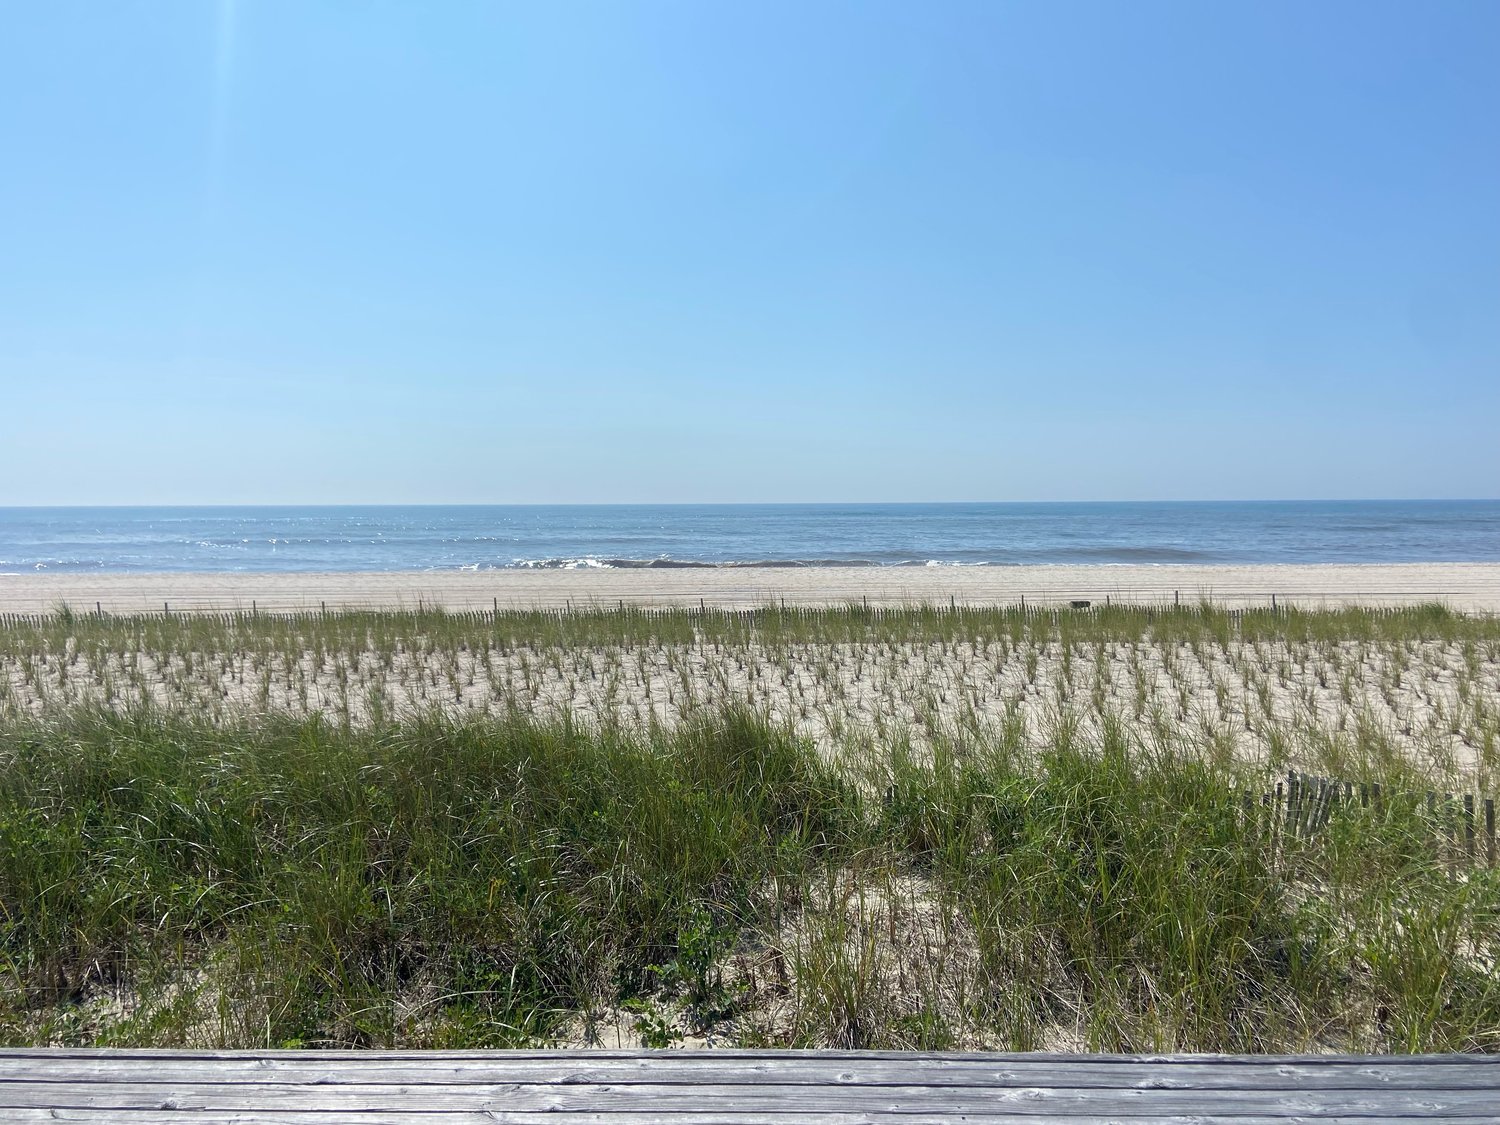 The beach at the Fire Island Pines, where bunker fish and feeding sharks have been spotted.